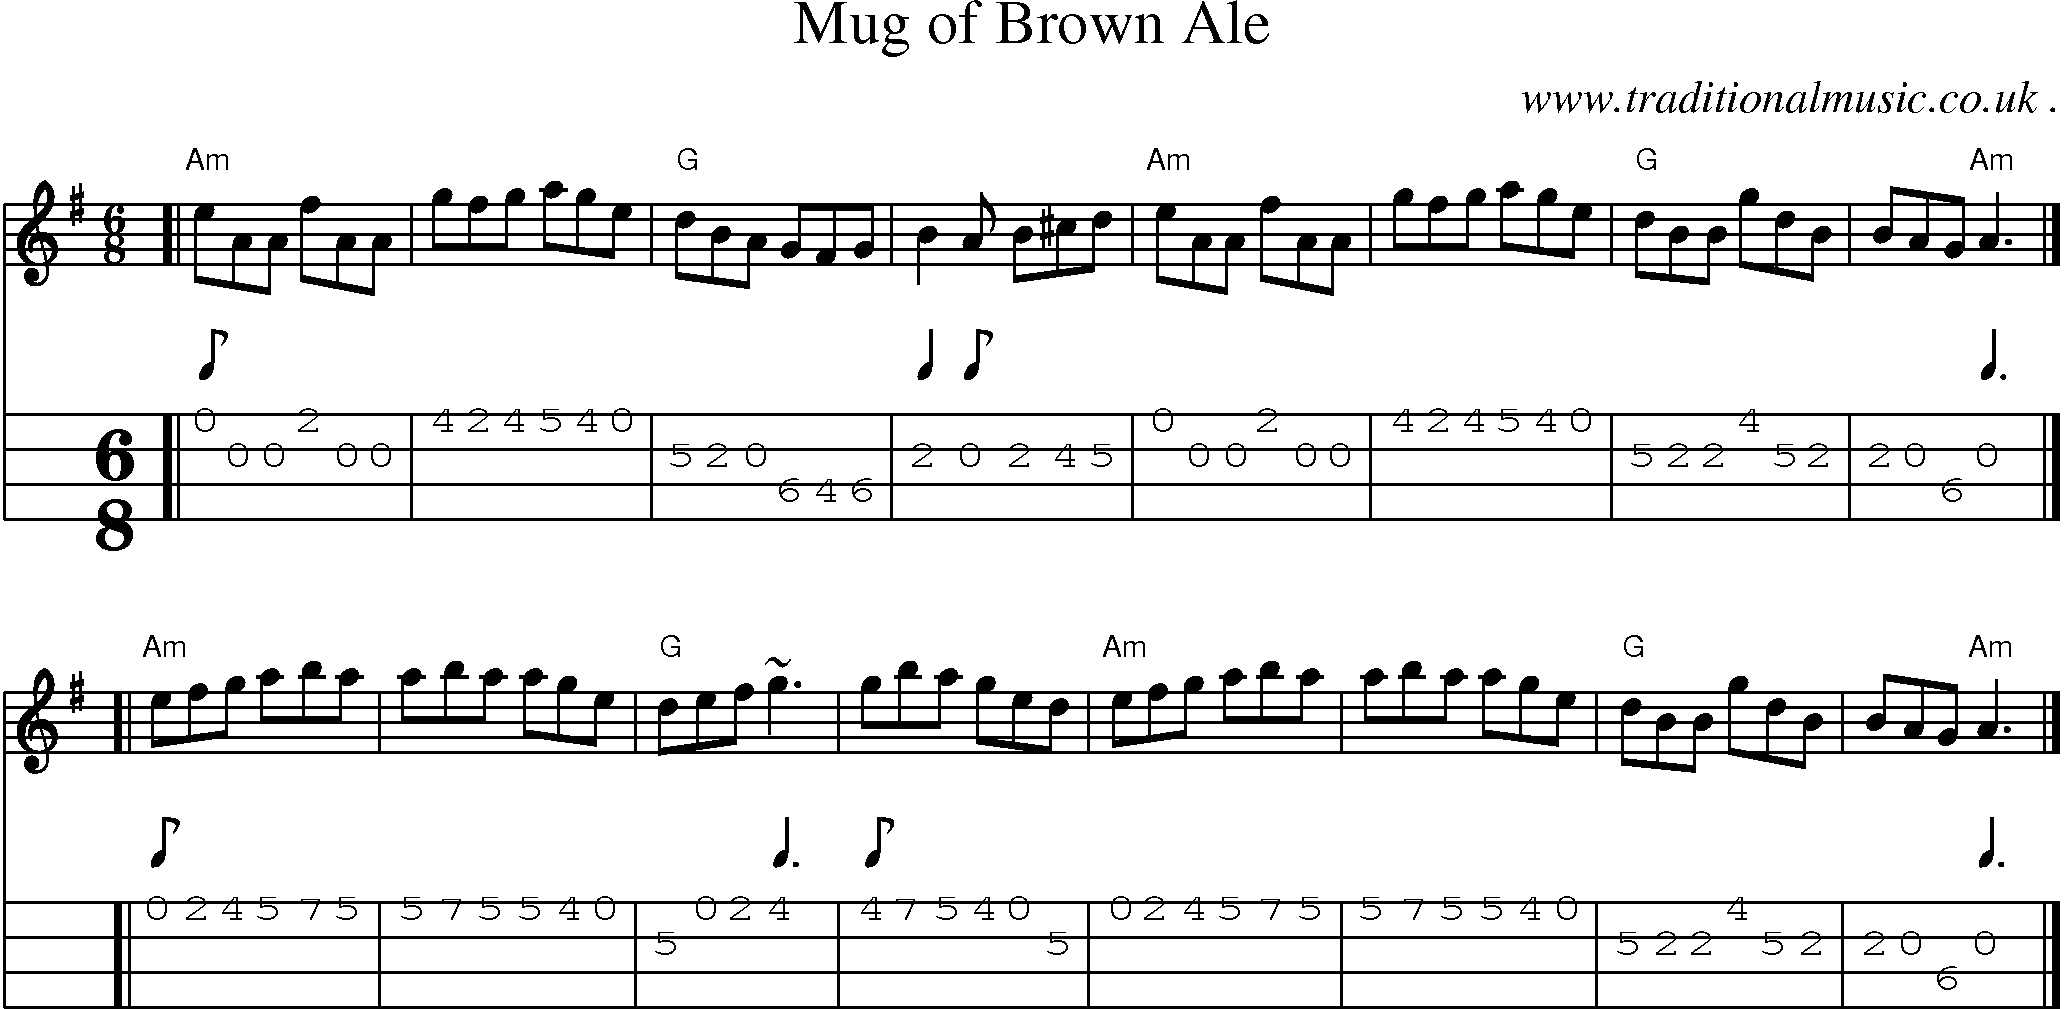 Sheet-music  score, Chords and Mandolin Tabs for Mug Of Brown Ale